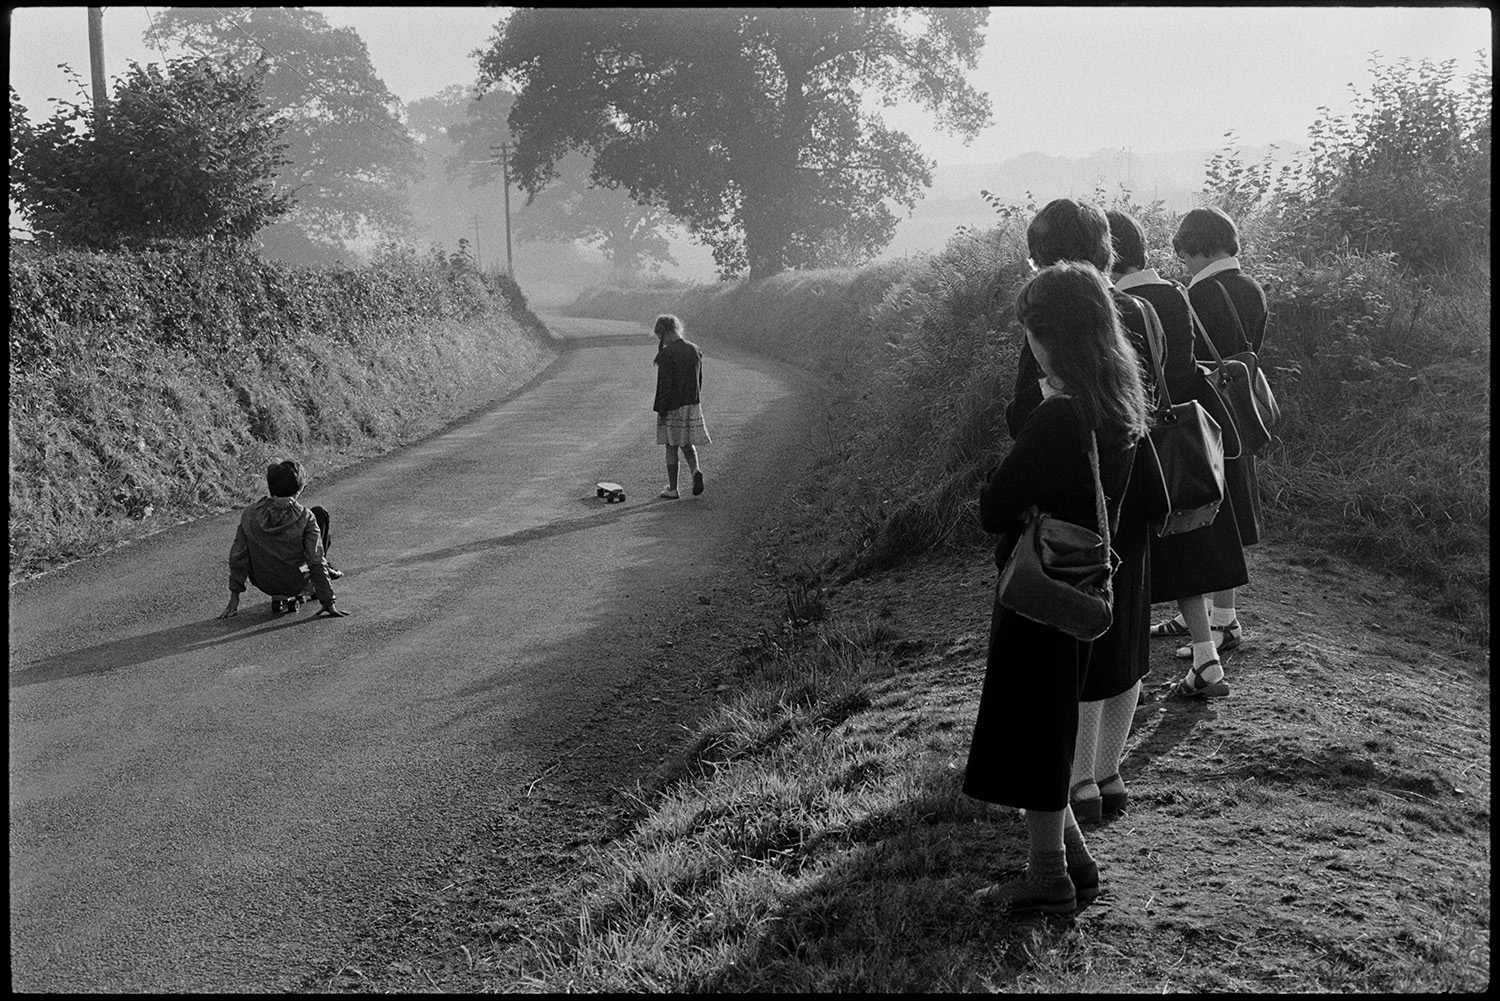 Children waiting for school bus, under oak tree, morning. Wearing uniform. 
[Six children in school uniform waiting for the school bus on the verge of a road at Lovistone, Merton. Two of the children are playing on skateboards in the road.]